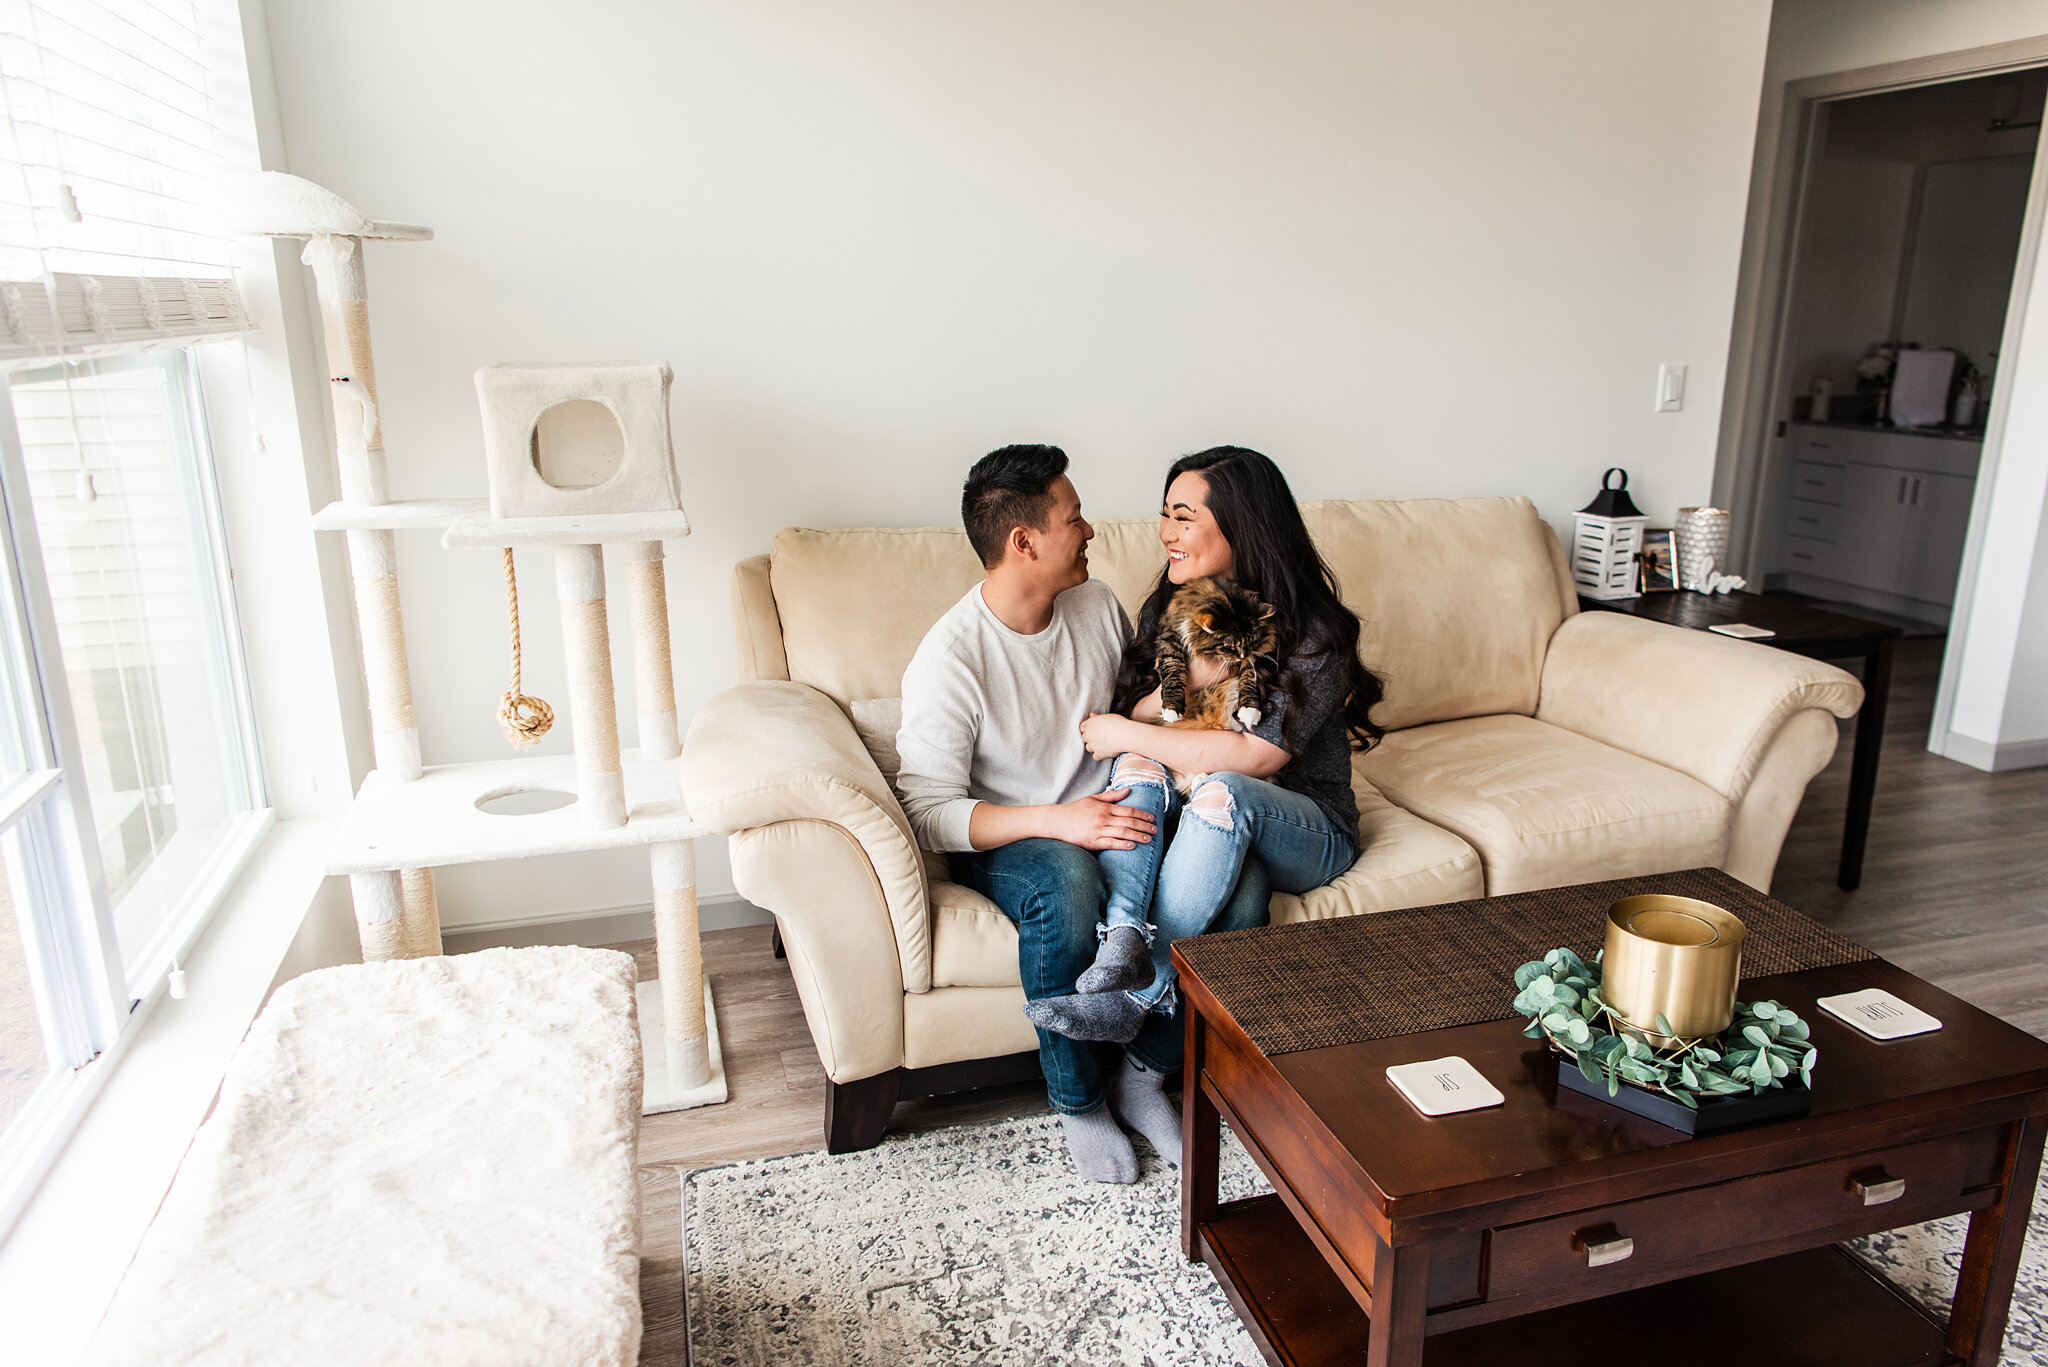 In_Home_Rochester_Couples_Session_JILL_STUDIO_Rochester_NY_Photographer_4002.jpg